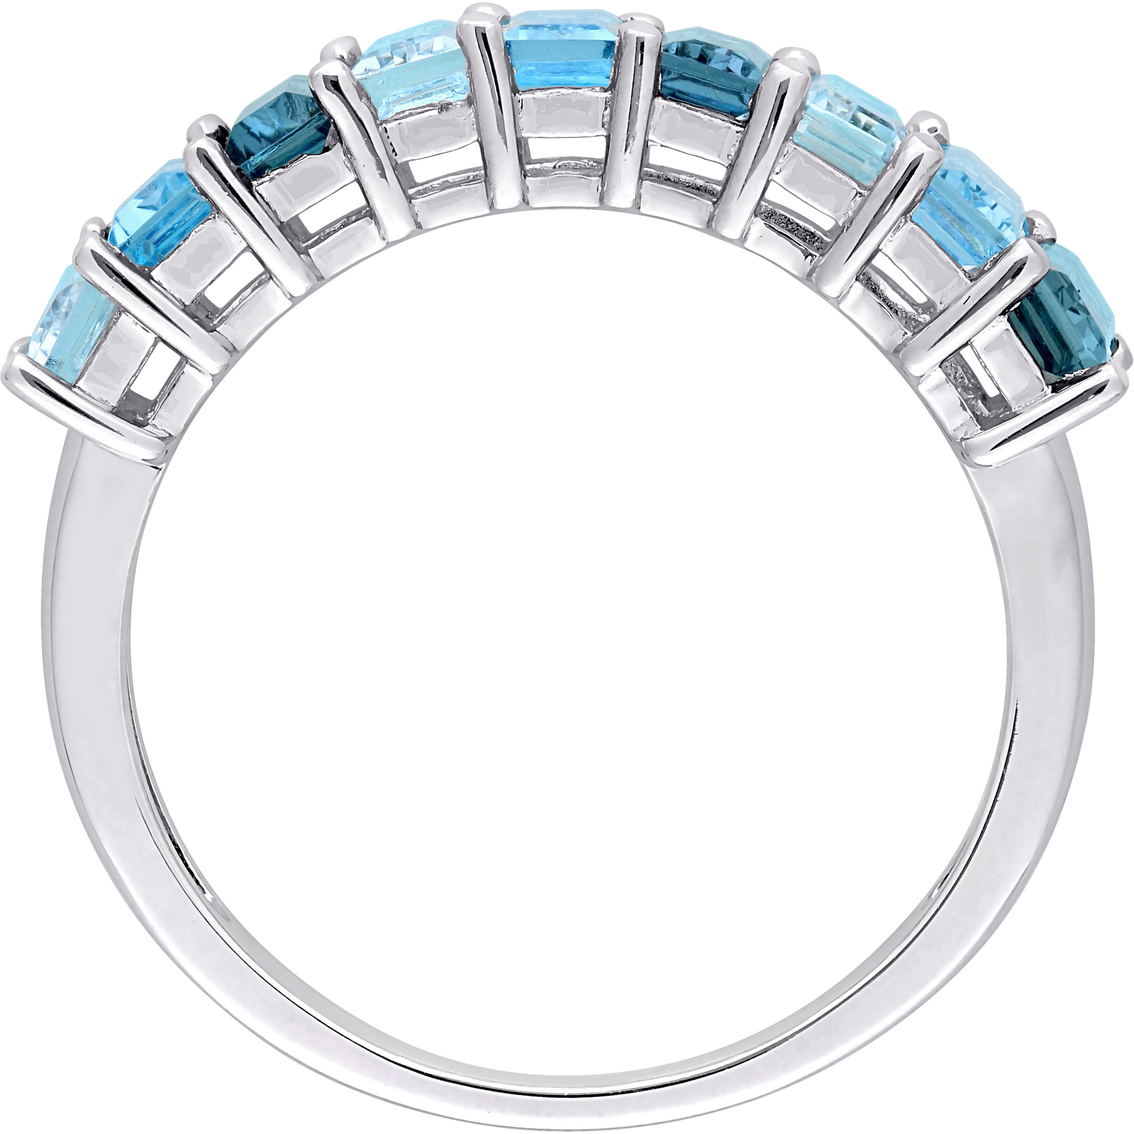 Sofia B. Sterling Silver 2 1/2 CTW Blue Topaz Ring - Image 2 of 4